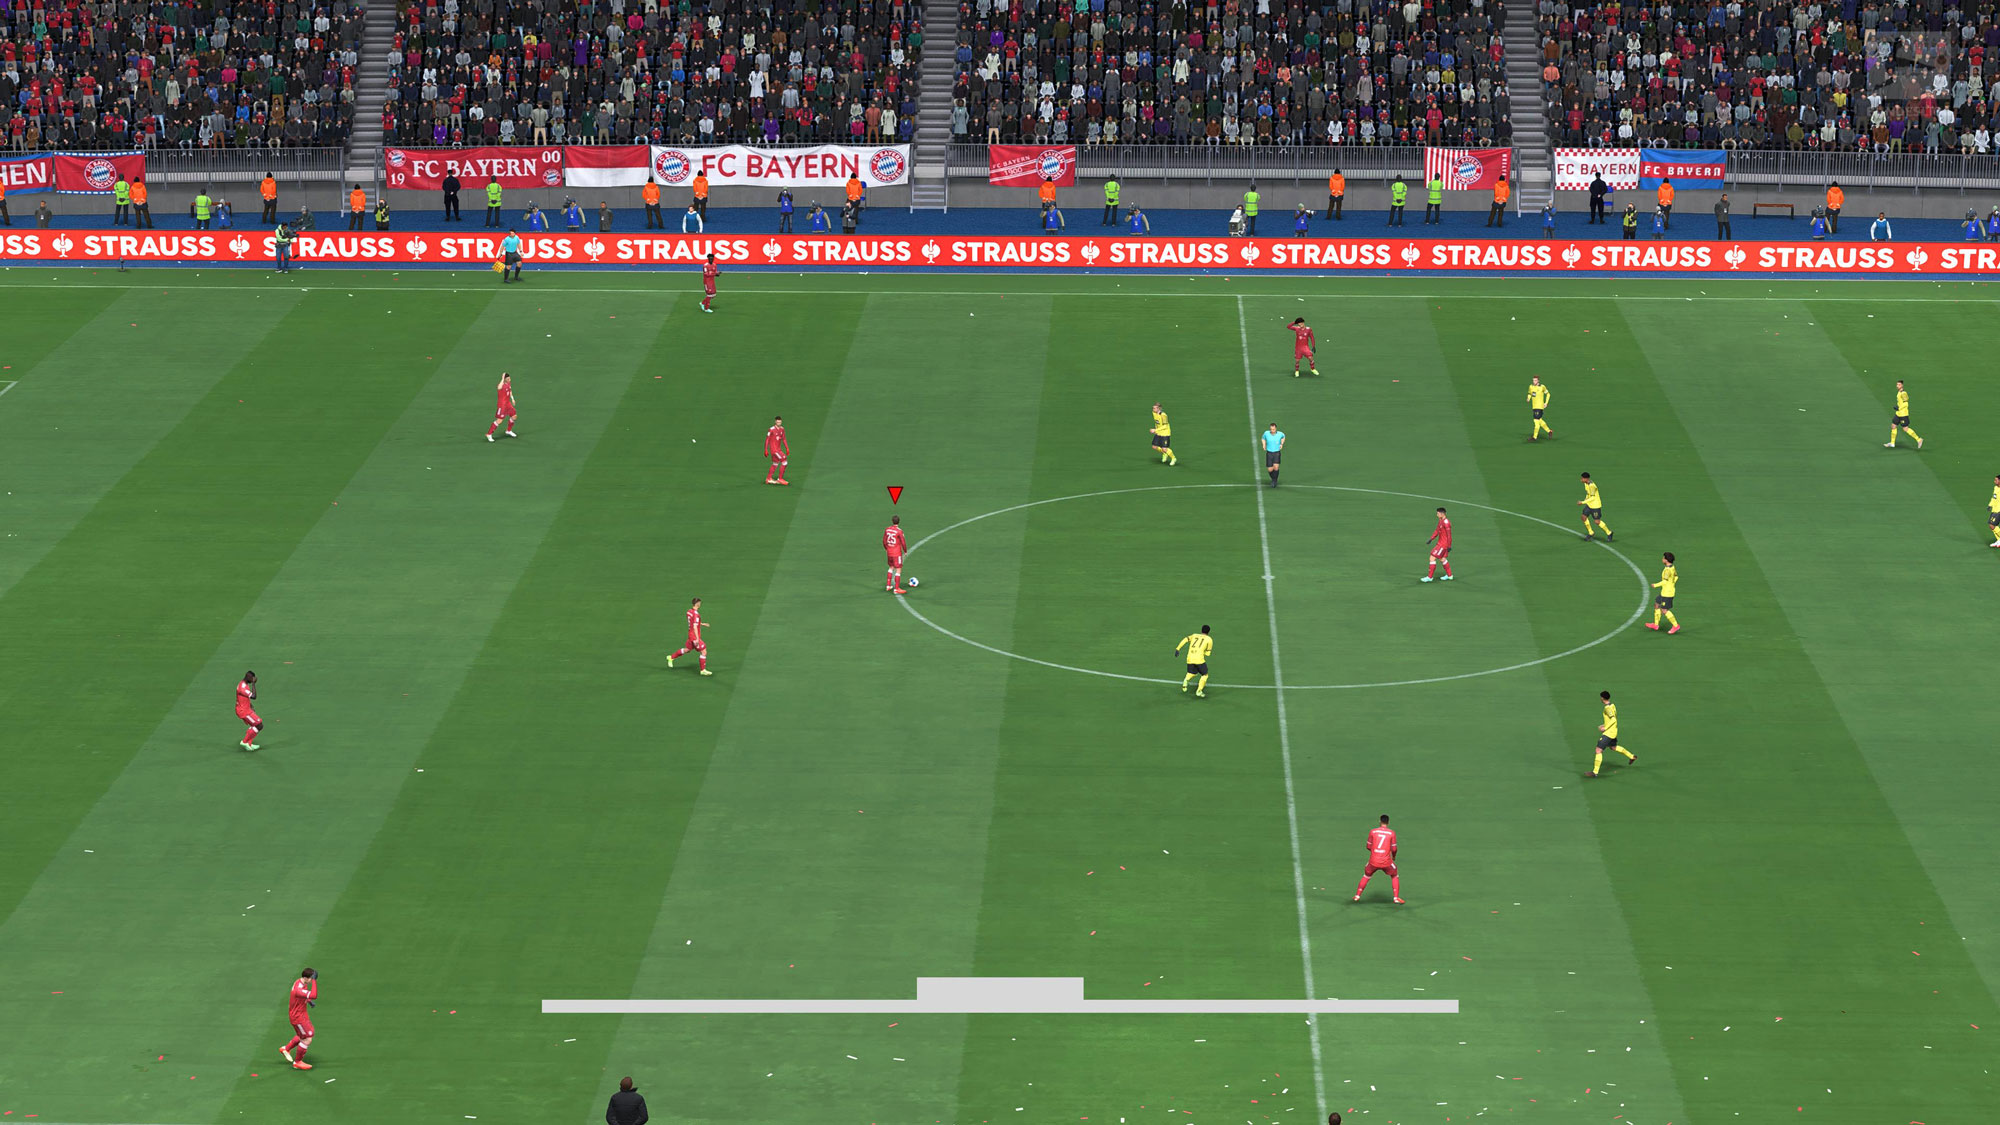 FIFA 22 tips and tricks: Explosive sprint, finesse shots, and how to dominate FUT